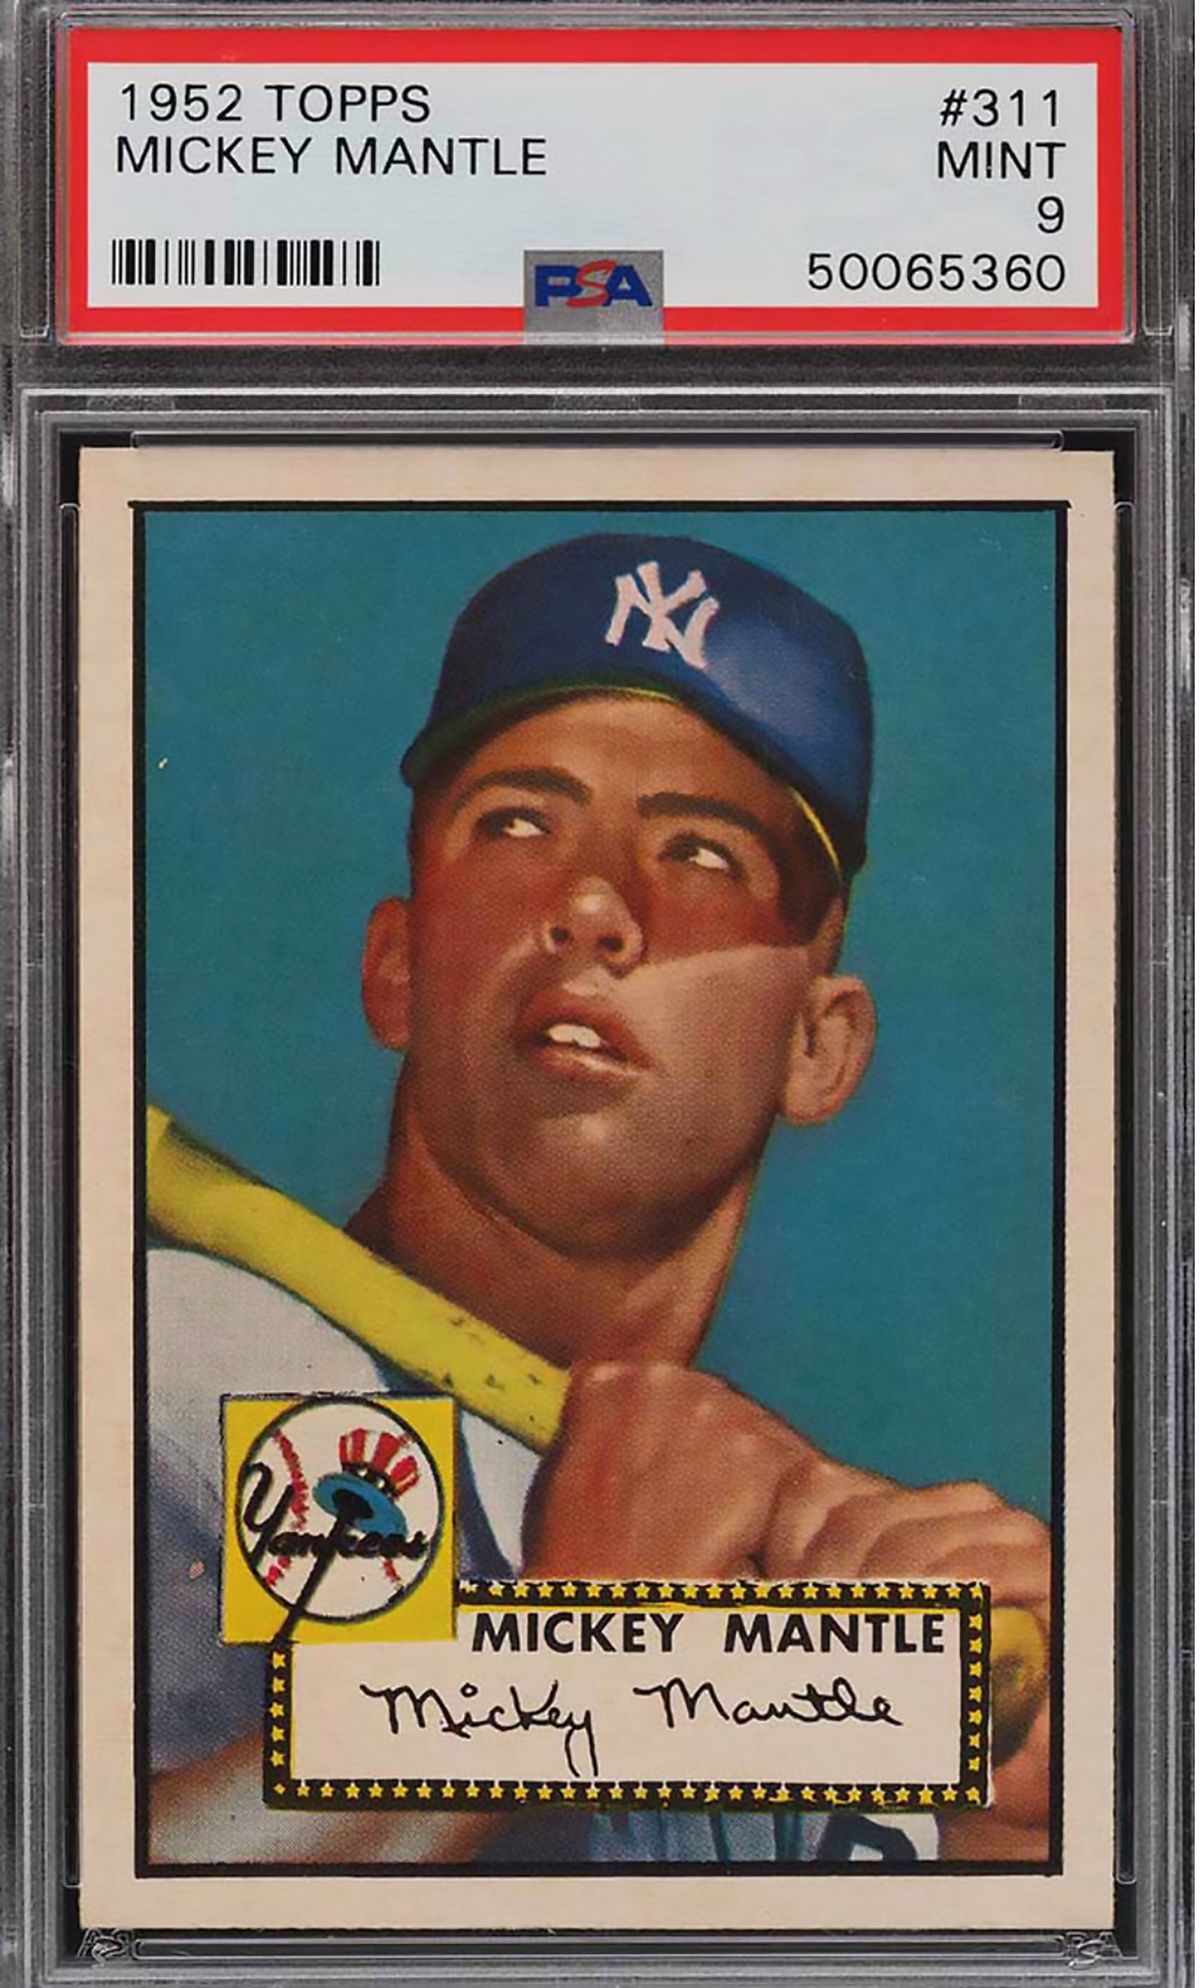 This Mickey Mantle baseball card sold for a record $5.2m in January 2021 via PWCC Marketplace Courtesy of PWCC Marketplace